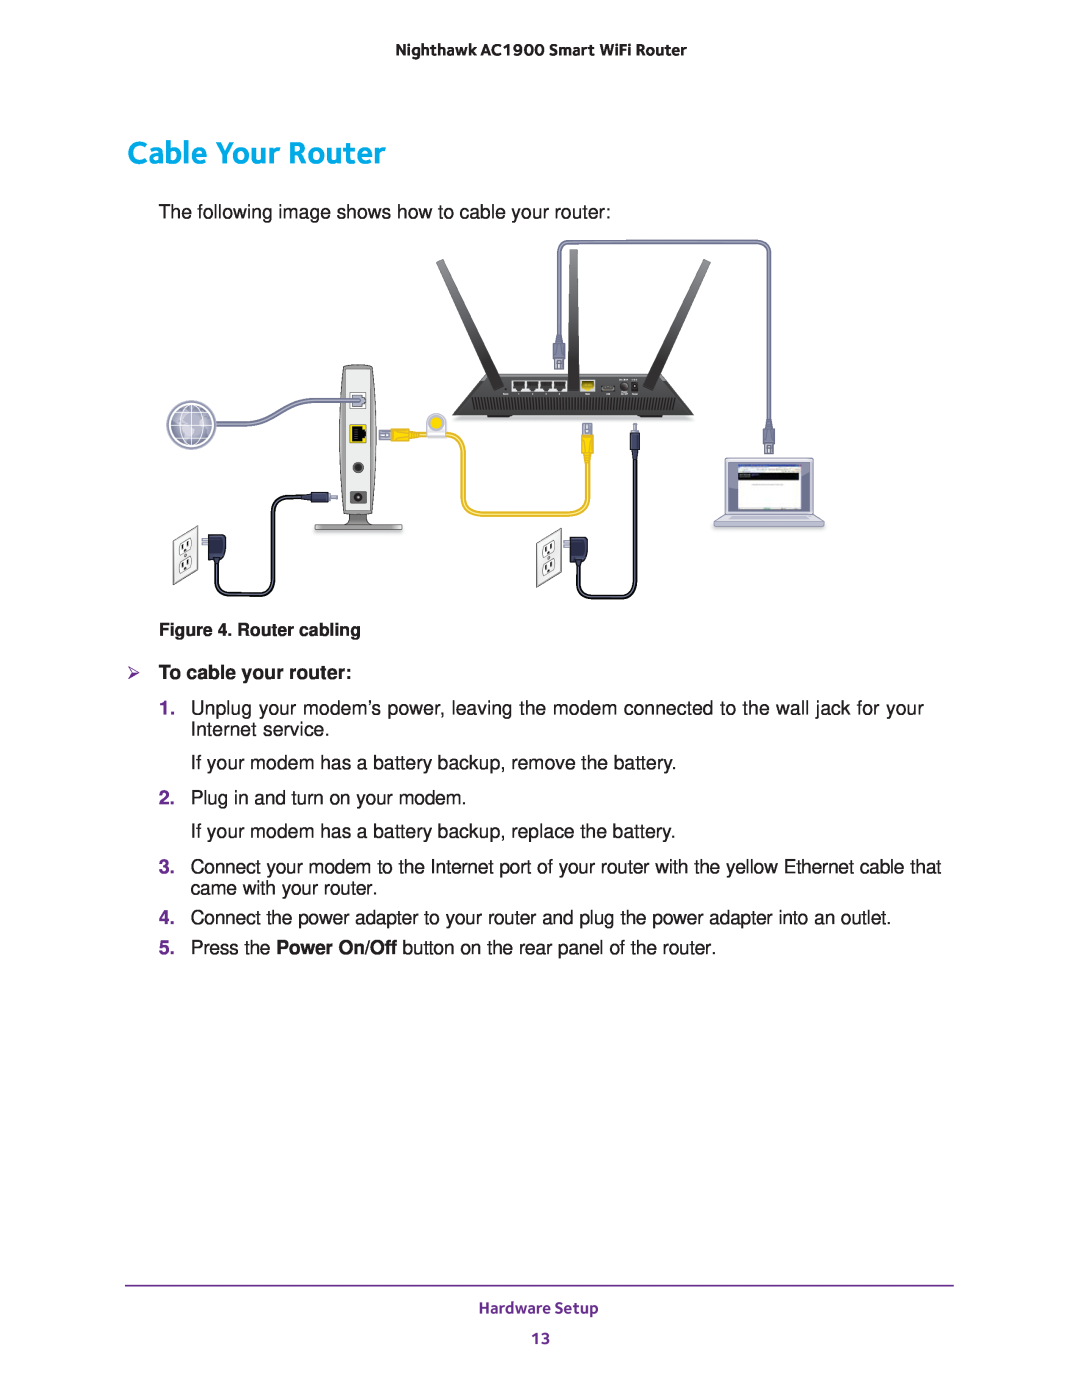 NETGEAR Model R7000 user manual Cable Your Router,  To cable your router 